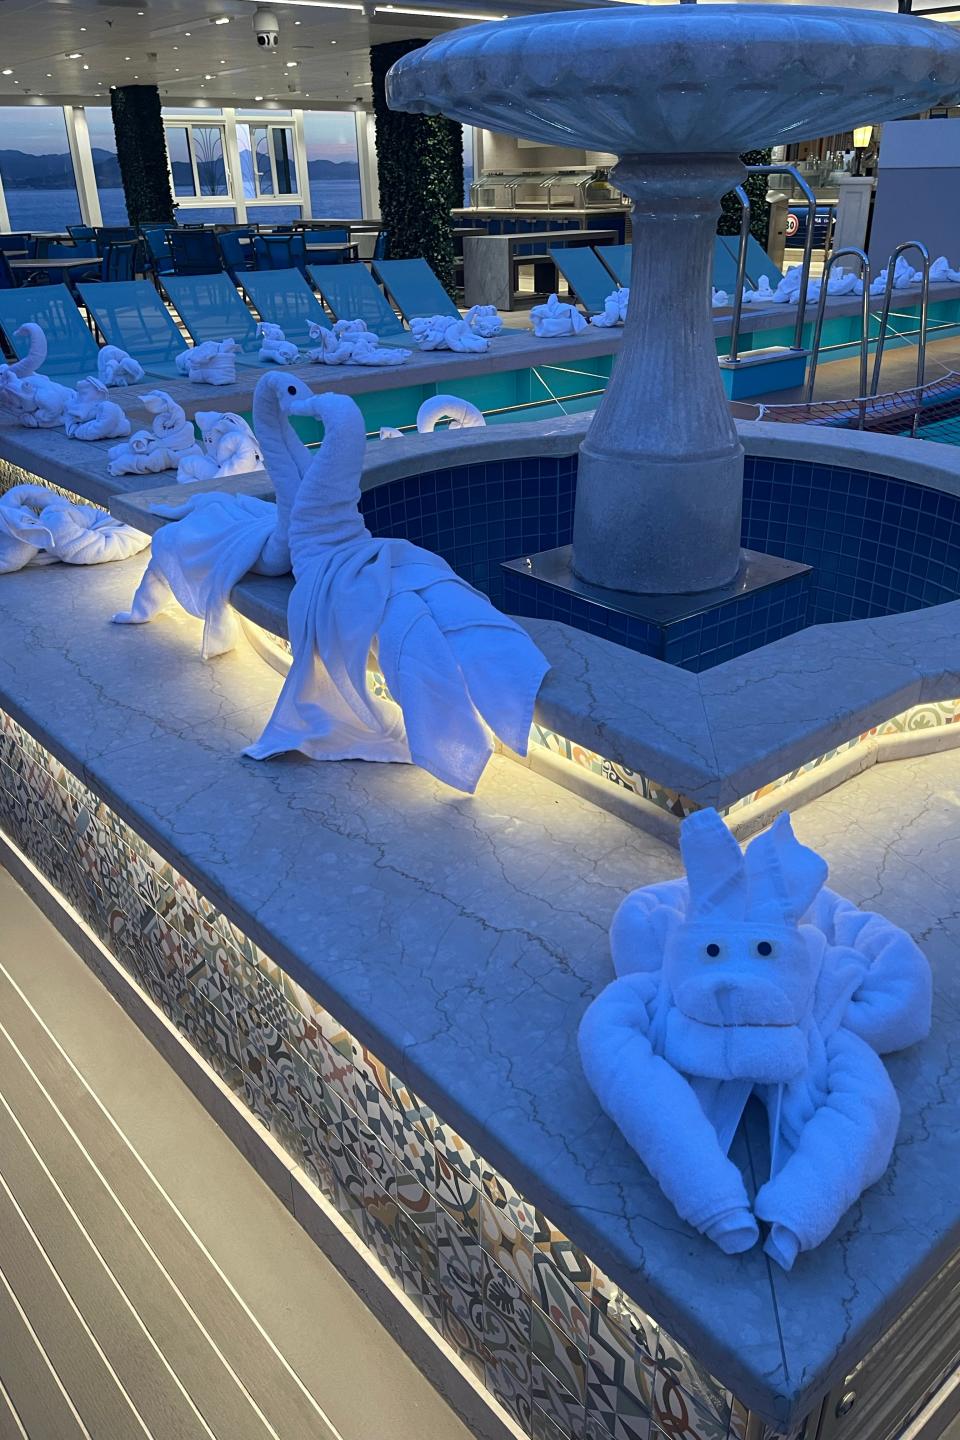 Towel animals displayed around a cruise ship pool with a fountain centerpiece